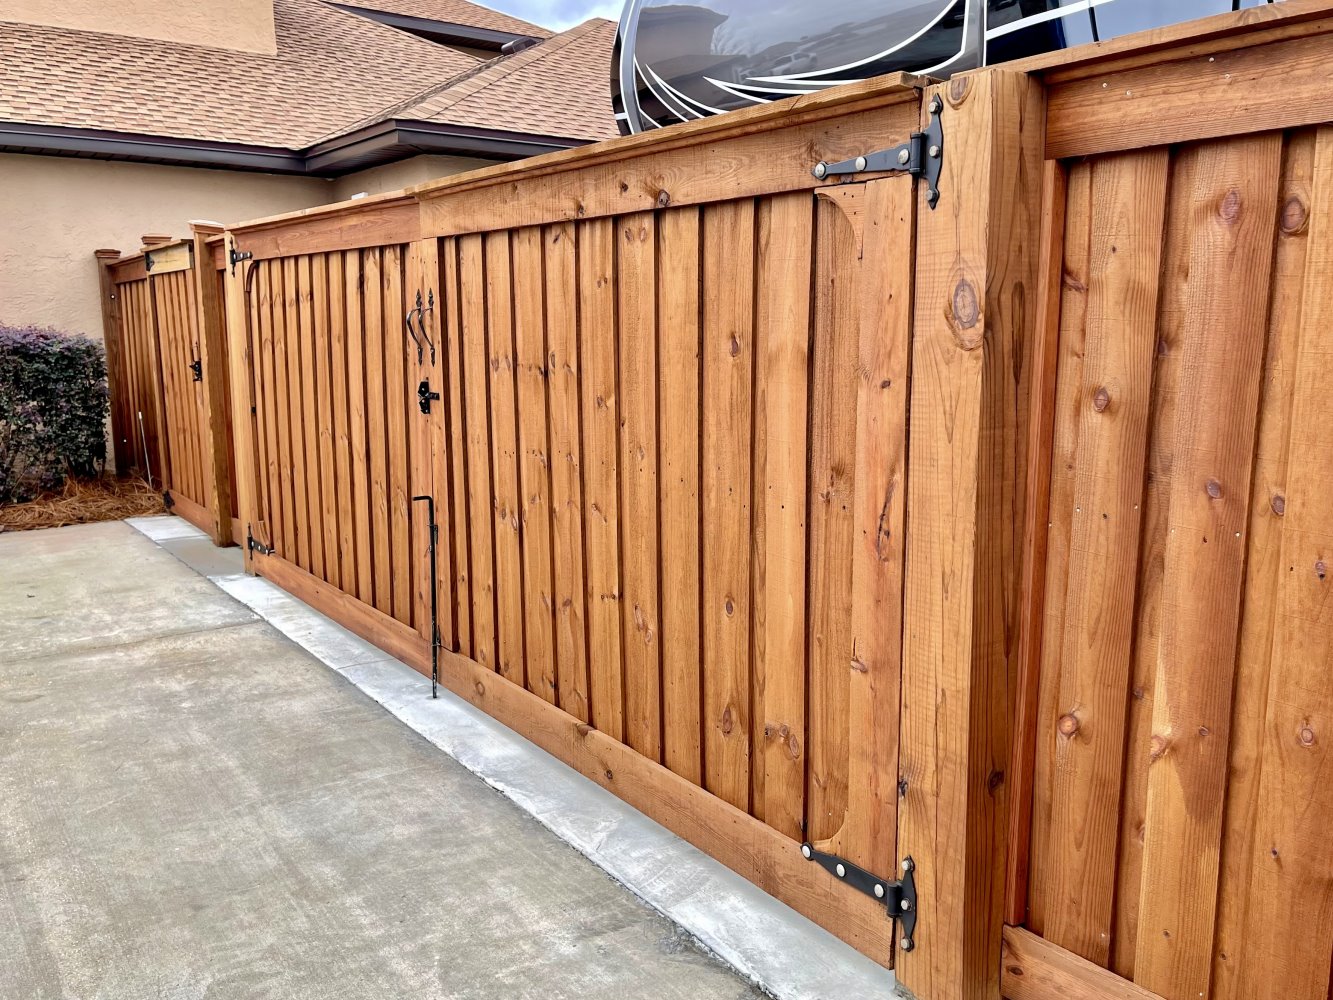 Lakeside FL cap and trim style wood fence